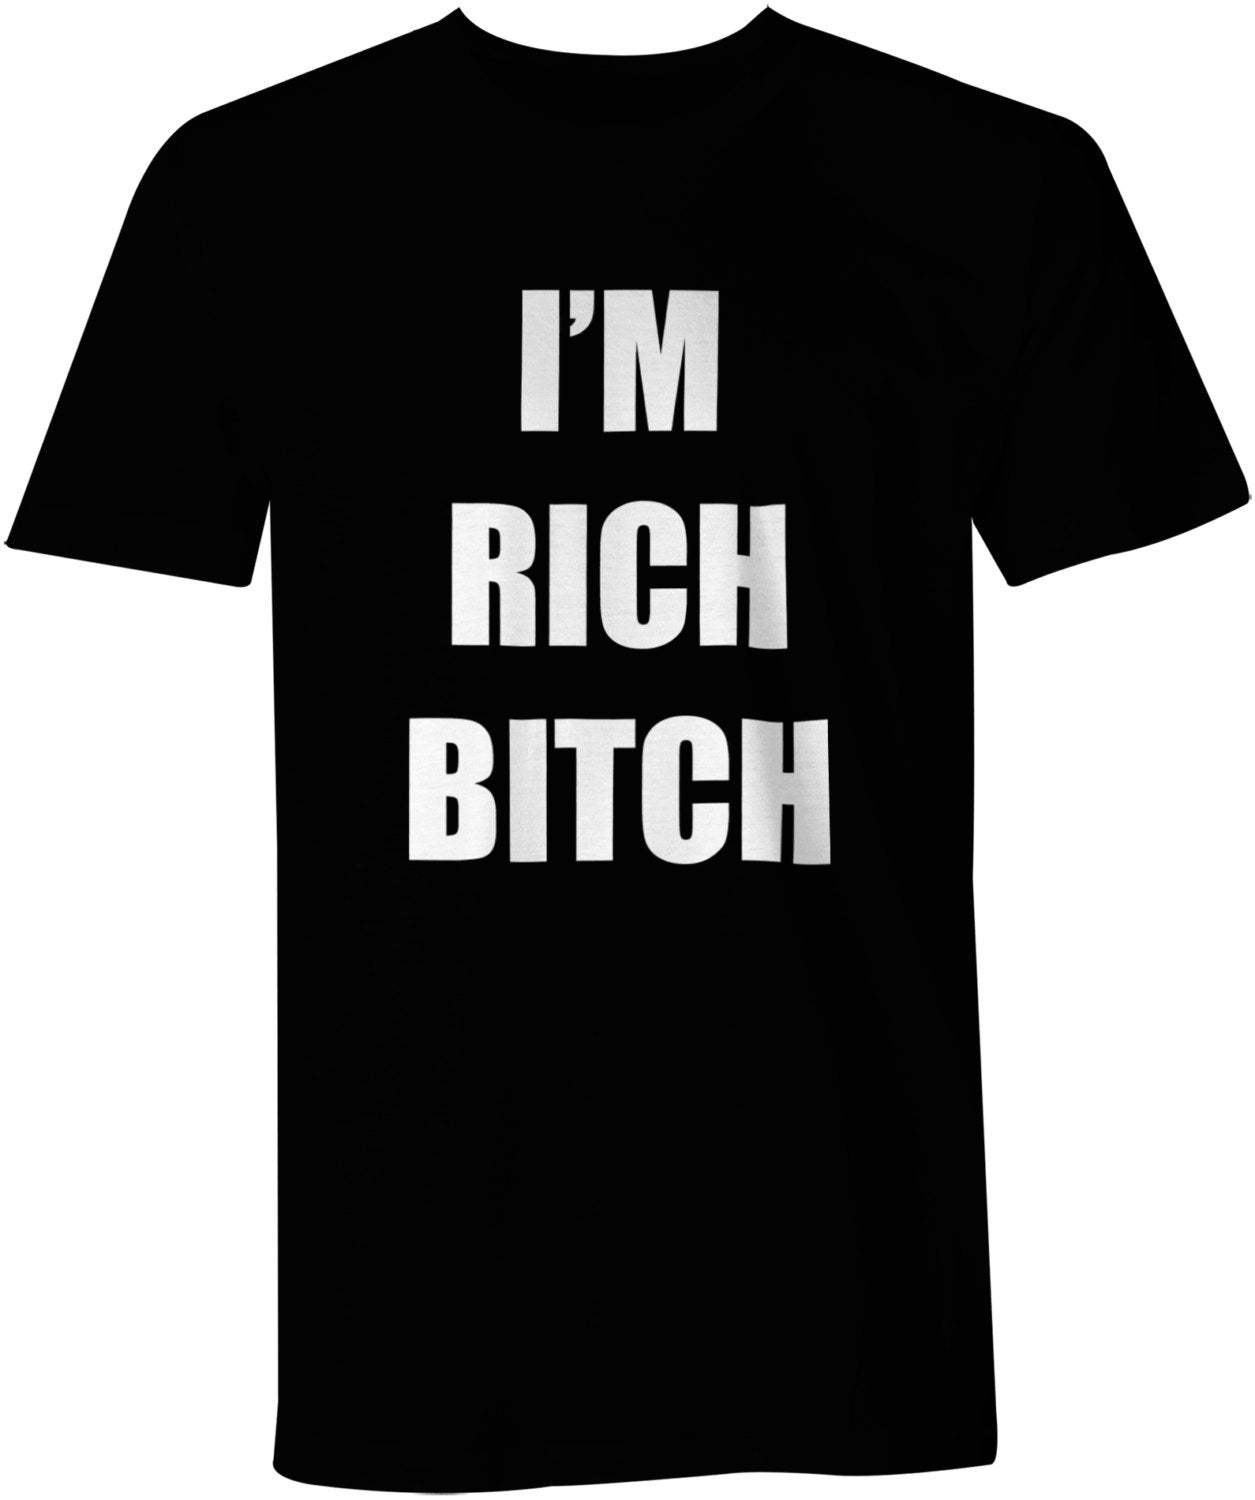 Black t-shirt with white font that says "I'm rich bitch"